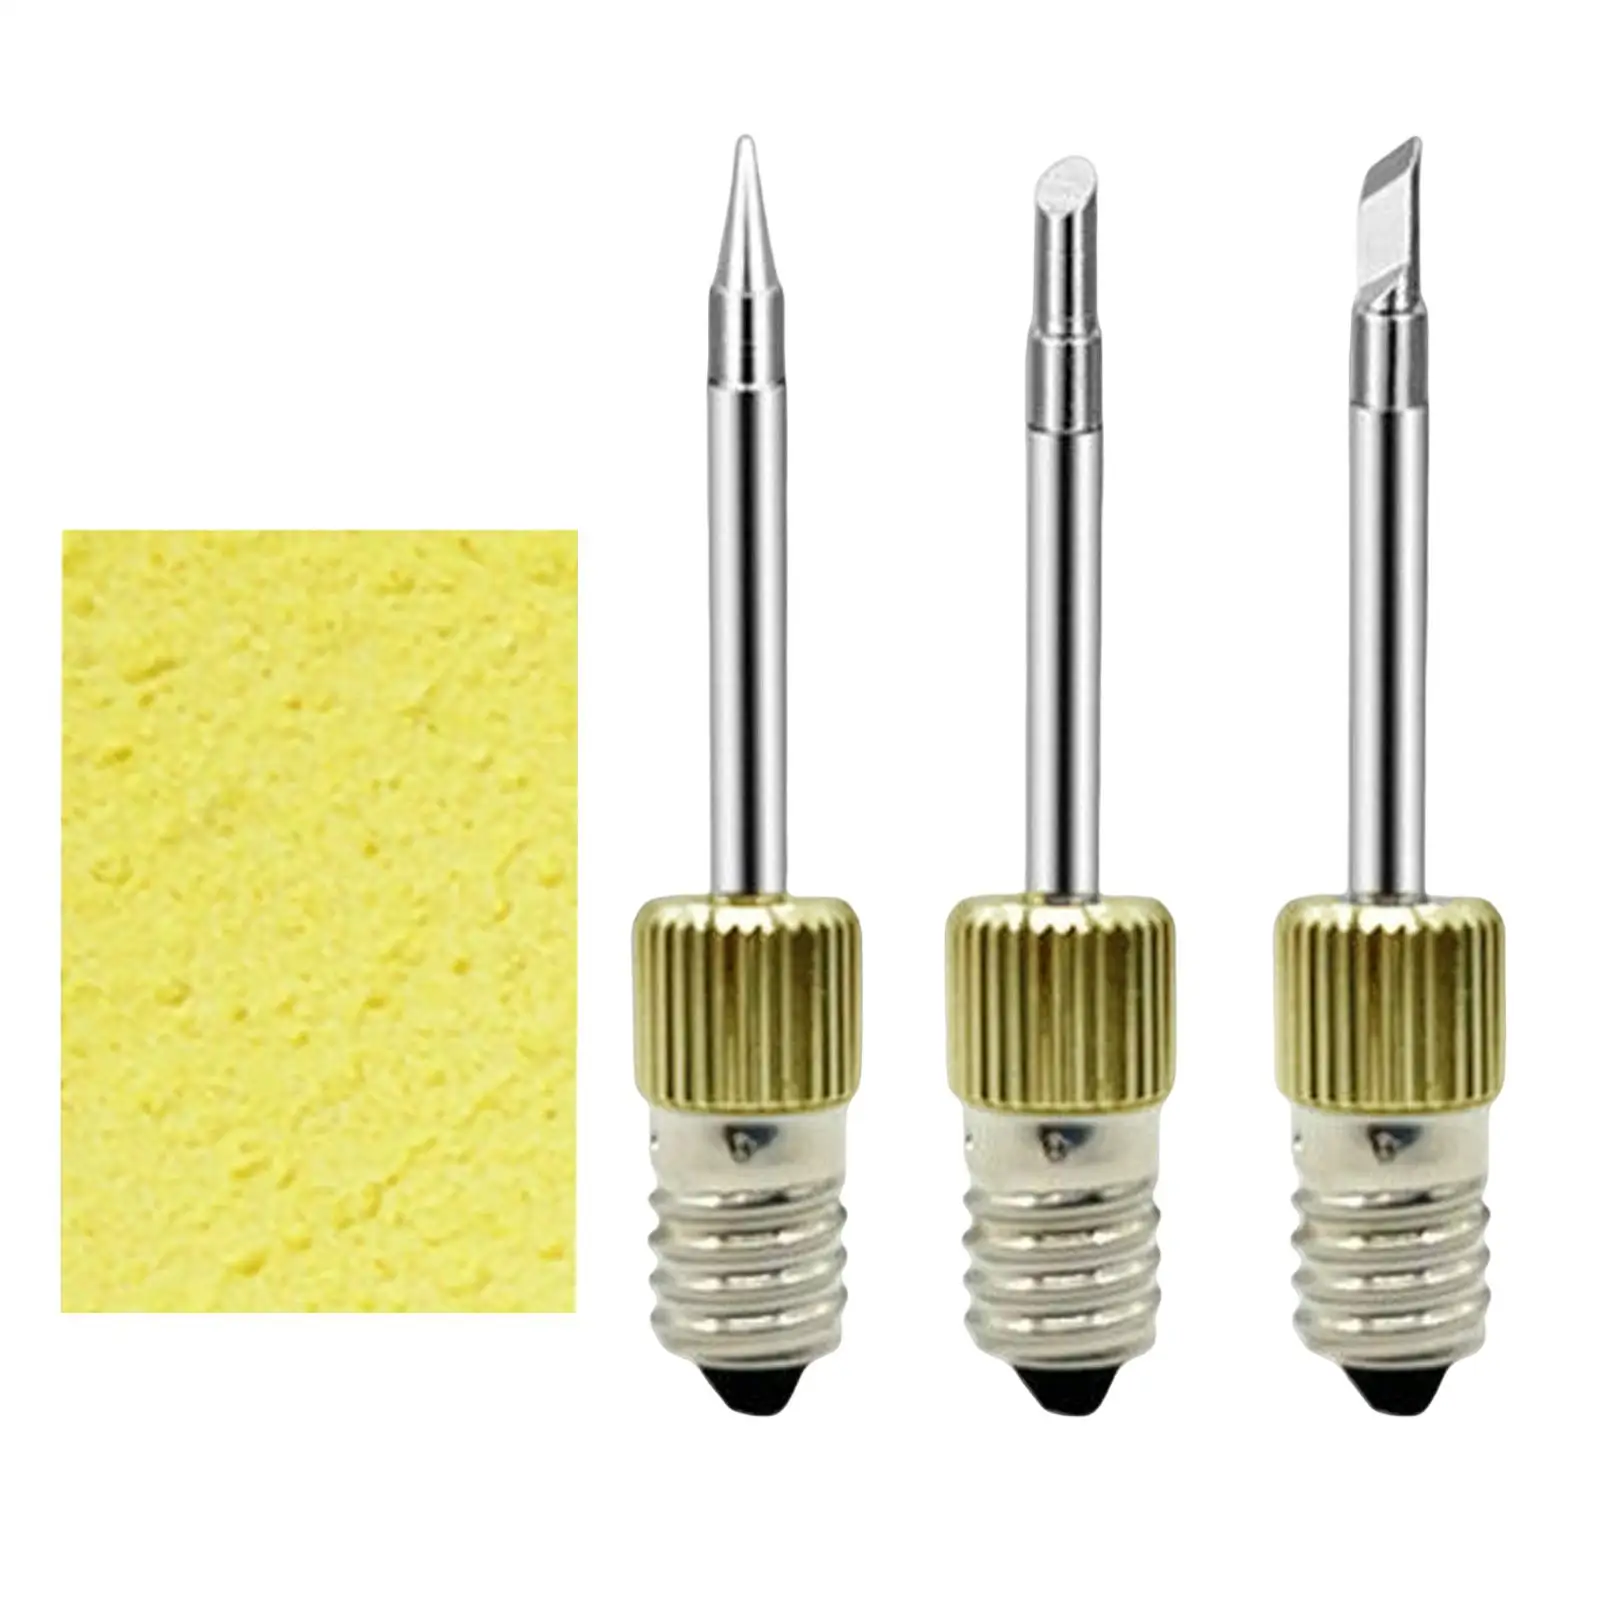 3Pcs Soldering Iron Tips with Cleaning Sponge E10 Soldering Tips Accessories